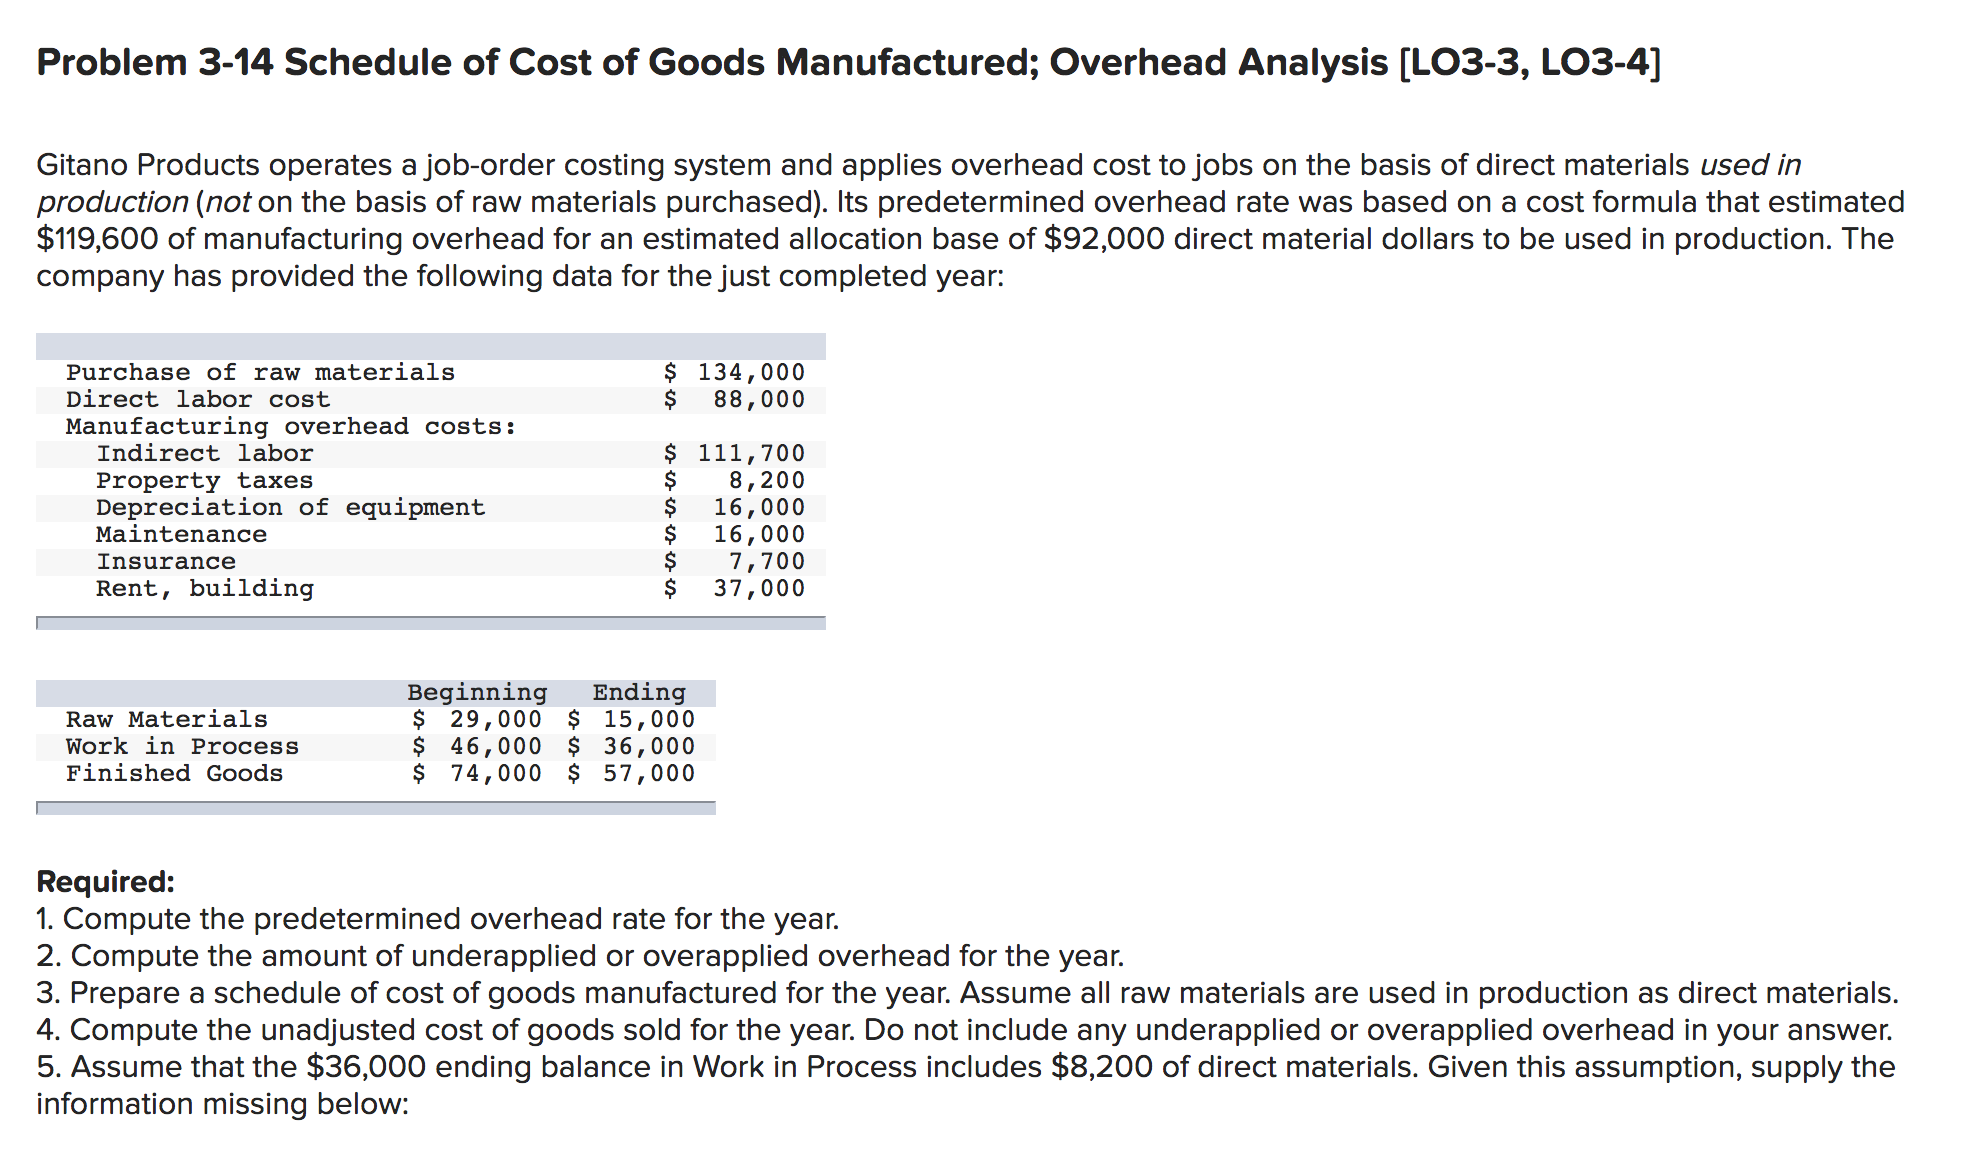 Problem 3-14 Schedule of Cost of Goods Manufactured; Overhead Analysis [LO3-3, LO3-4]
Gitano Products operates a job-order costing system and applies overhead cost to jobs on the basis of direct materials used in
production (not on the basis of raw materials purchased). Its predetermined overhead rate was based on a cost formula that estimated
$119,600 of manufacturing overhead for an estimated allocation base of $92,000 direct material dollars to be used in production. The
company has provided the following data for the just completed year:
$ 134,000
88,000
Purchase of raw materials
Direct labor cost
Manufacturing overhead costs:
Indirect labor
$ 111,700
8,200
16,000
16,000
7,700
37,000
Property taxes
Depreciation of equipment
Maintenance
Insurance
Rent, building
Ending
Beginning
$ 29,000 $ 15,000
$ 46,000 $ 36,000
$ 74,000 $ 57,000
Raw Materials
Work in Process
Finished Goods
Required:
1. Compute the predetermined overhead rate for the year.
2. Compute the amount of underapplied or overapplied overhead for the year.
3. Prepare a schedule of cost of goods manufactured for the year. Assume all raw materials are used in production as direct materials.
4. Compute the unadjusted cost of goods sold for the year. Do not include any underapplied or overapplied overhead in your answer.
5. Assume that the $36,000 ending balance in Work in Process includes $8,200 of direct materials. Given this assumption, supply the
information missing below:
